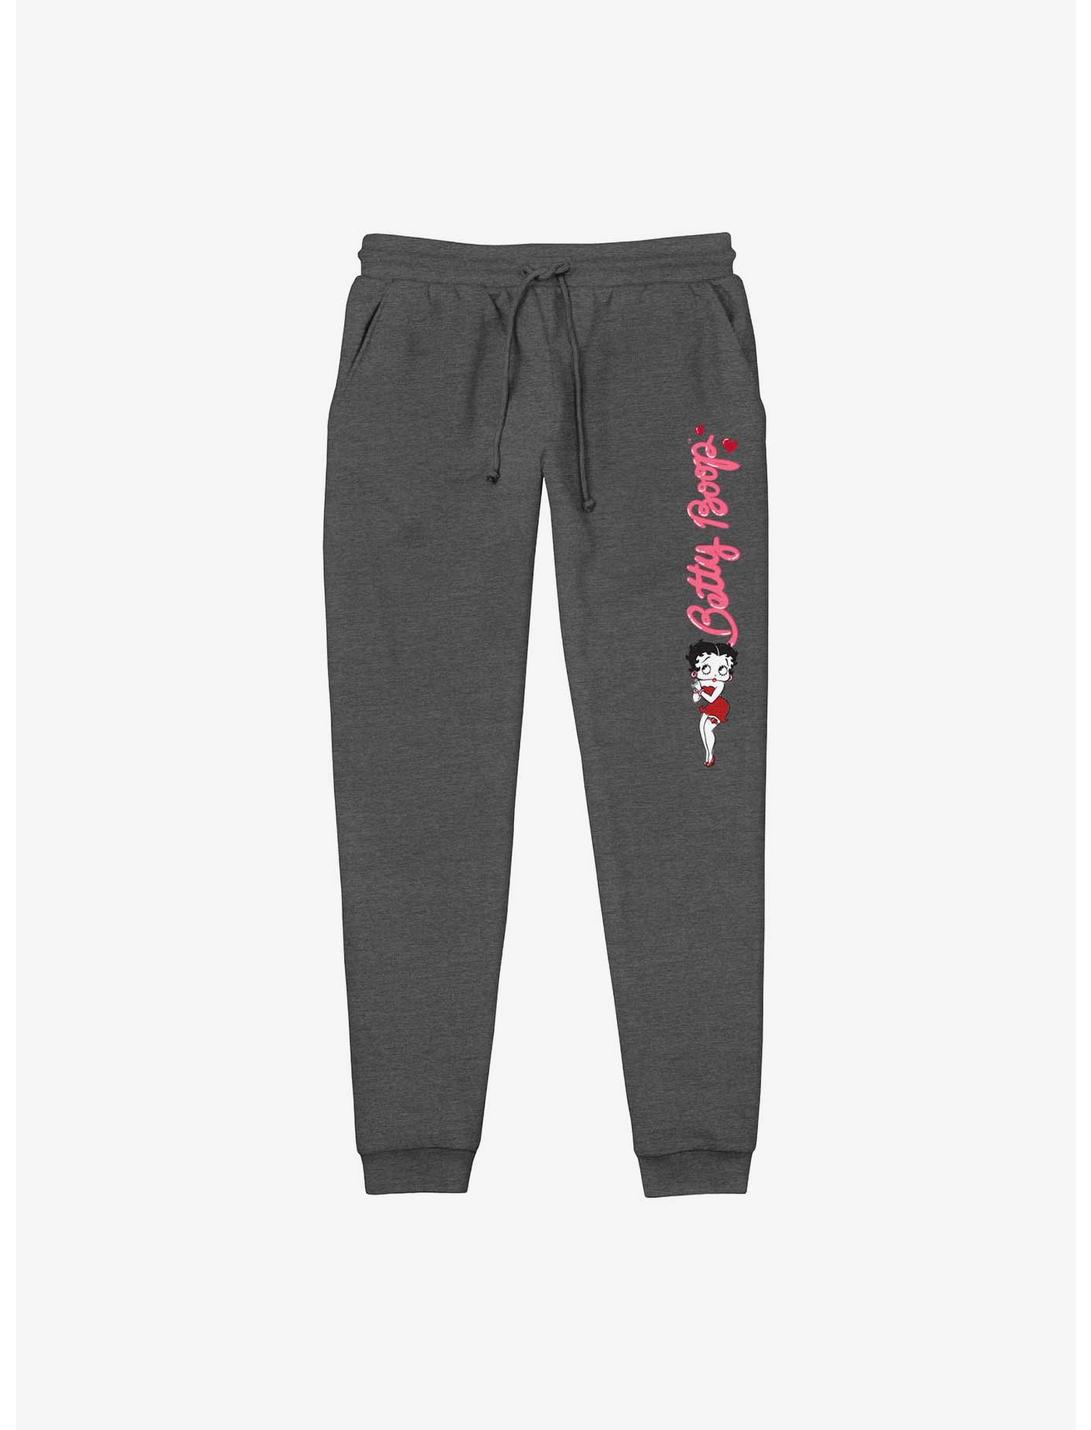 Betty Boop Lady In Red Logo Jogger Sweatpants, CHAR HTR, hi-res